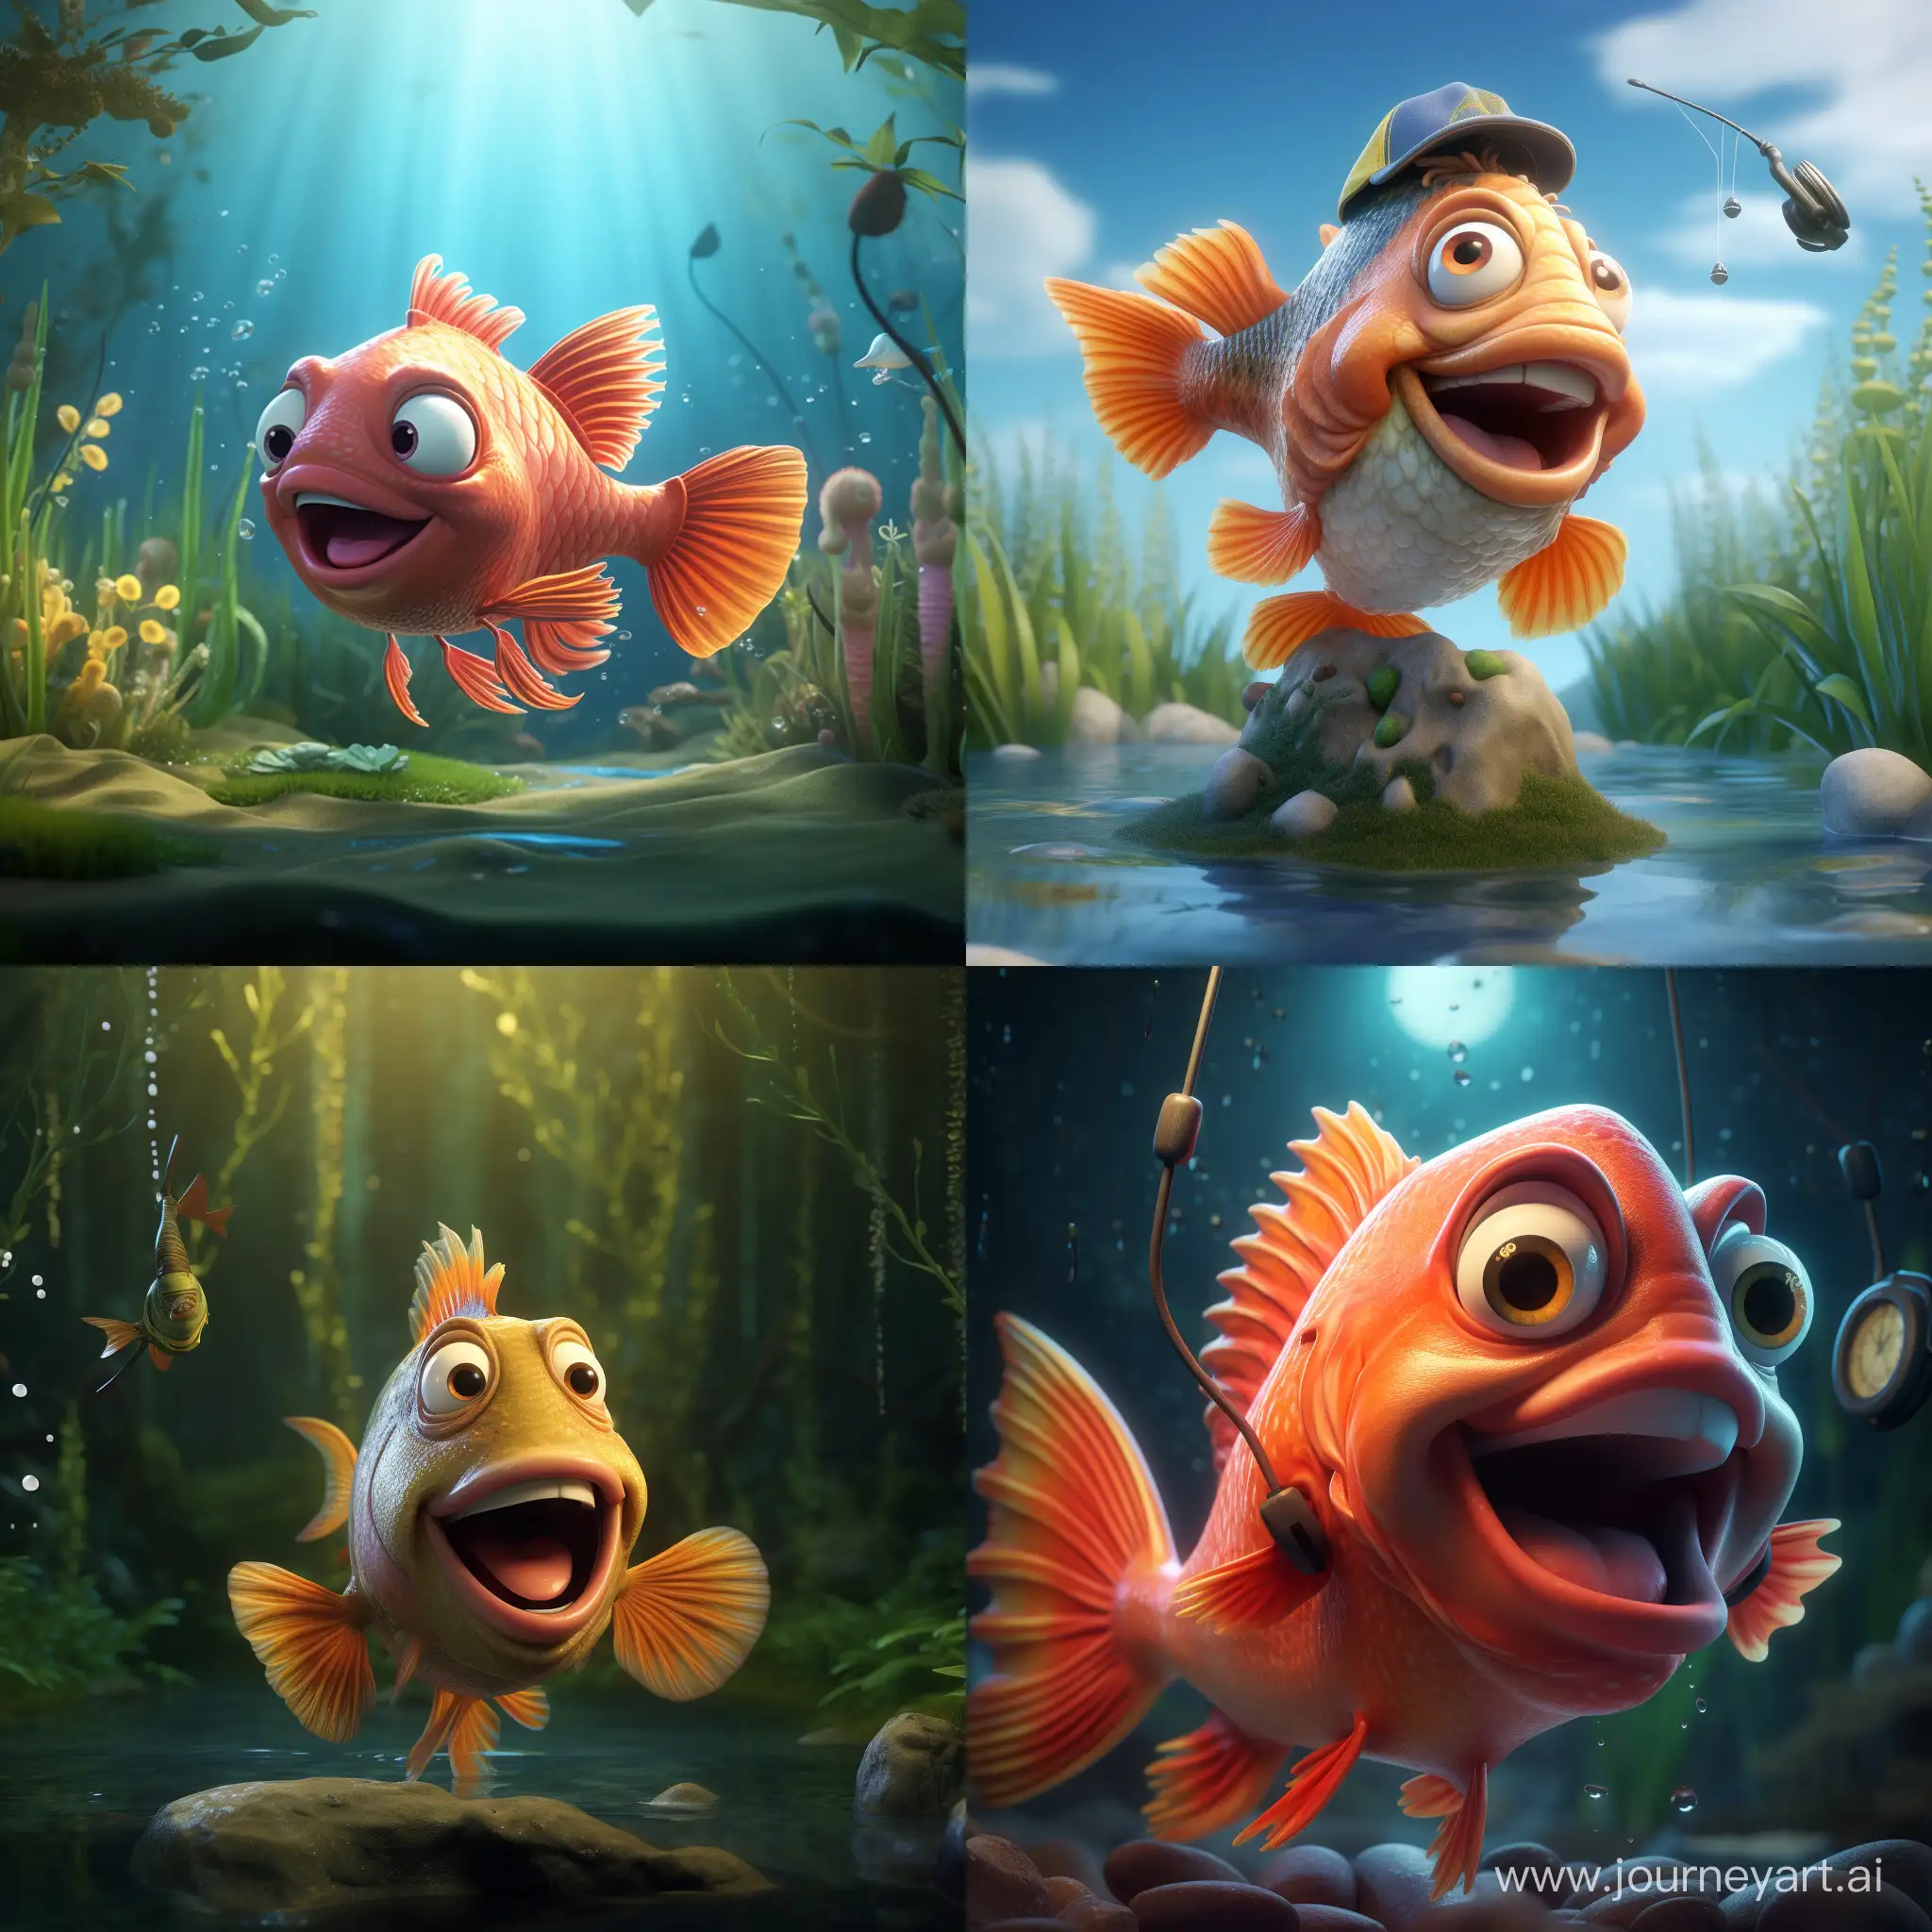 The talking fish is fishing. 3D animation 